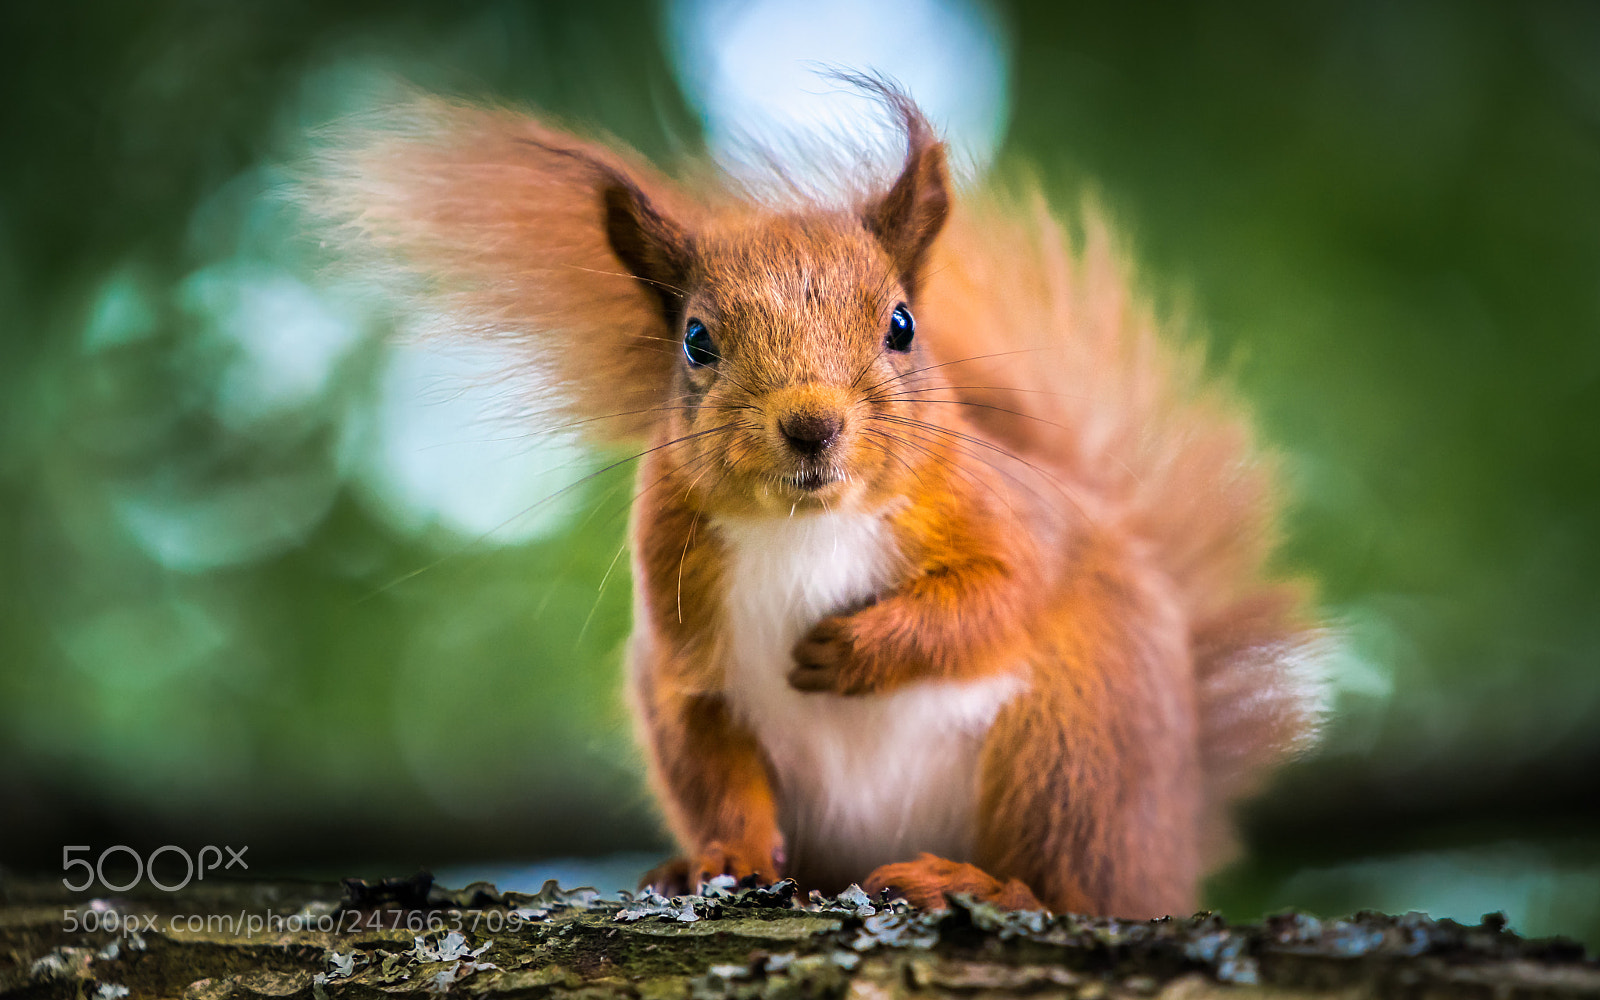 Sony a9 sample photo. Red squirrel photography